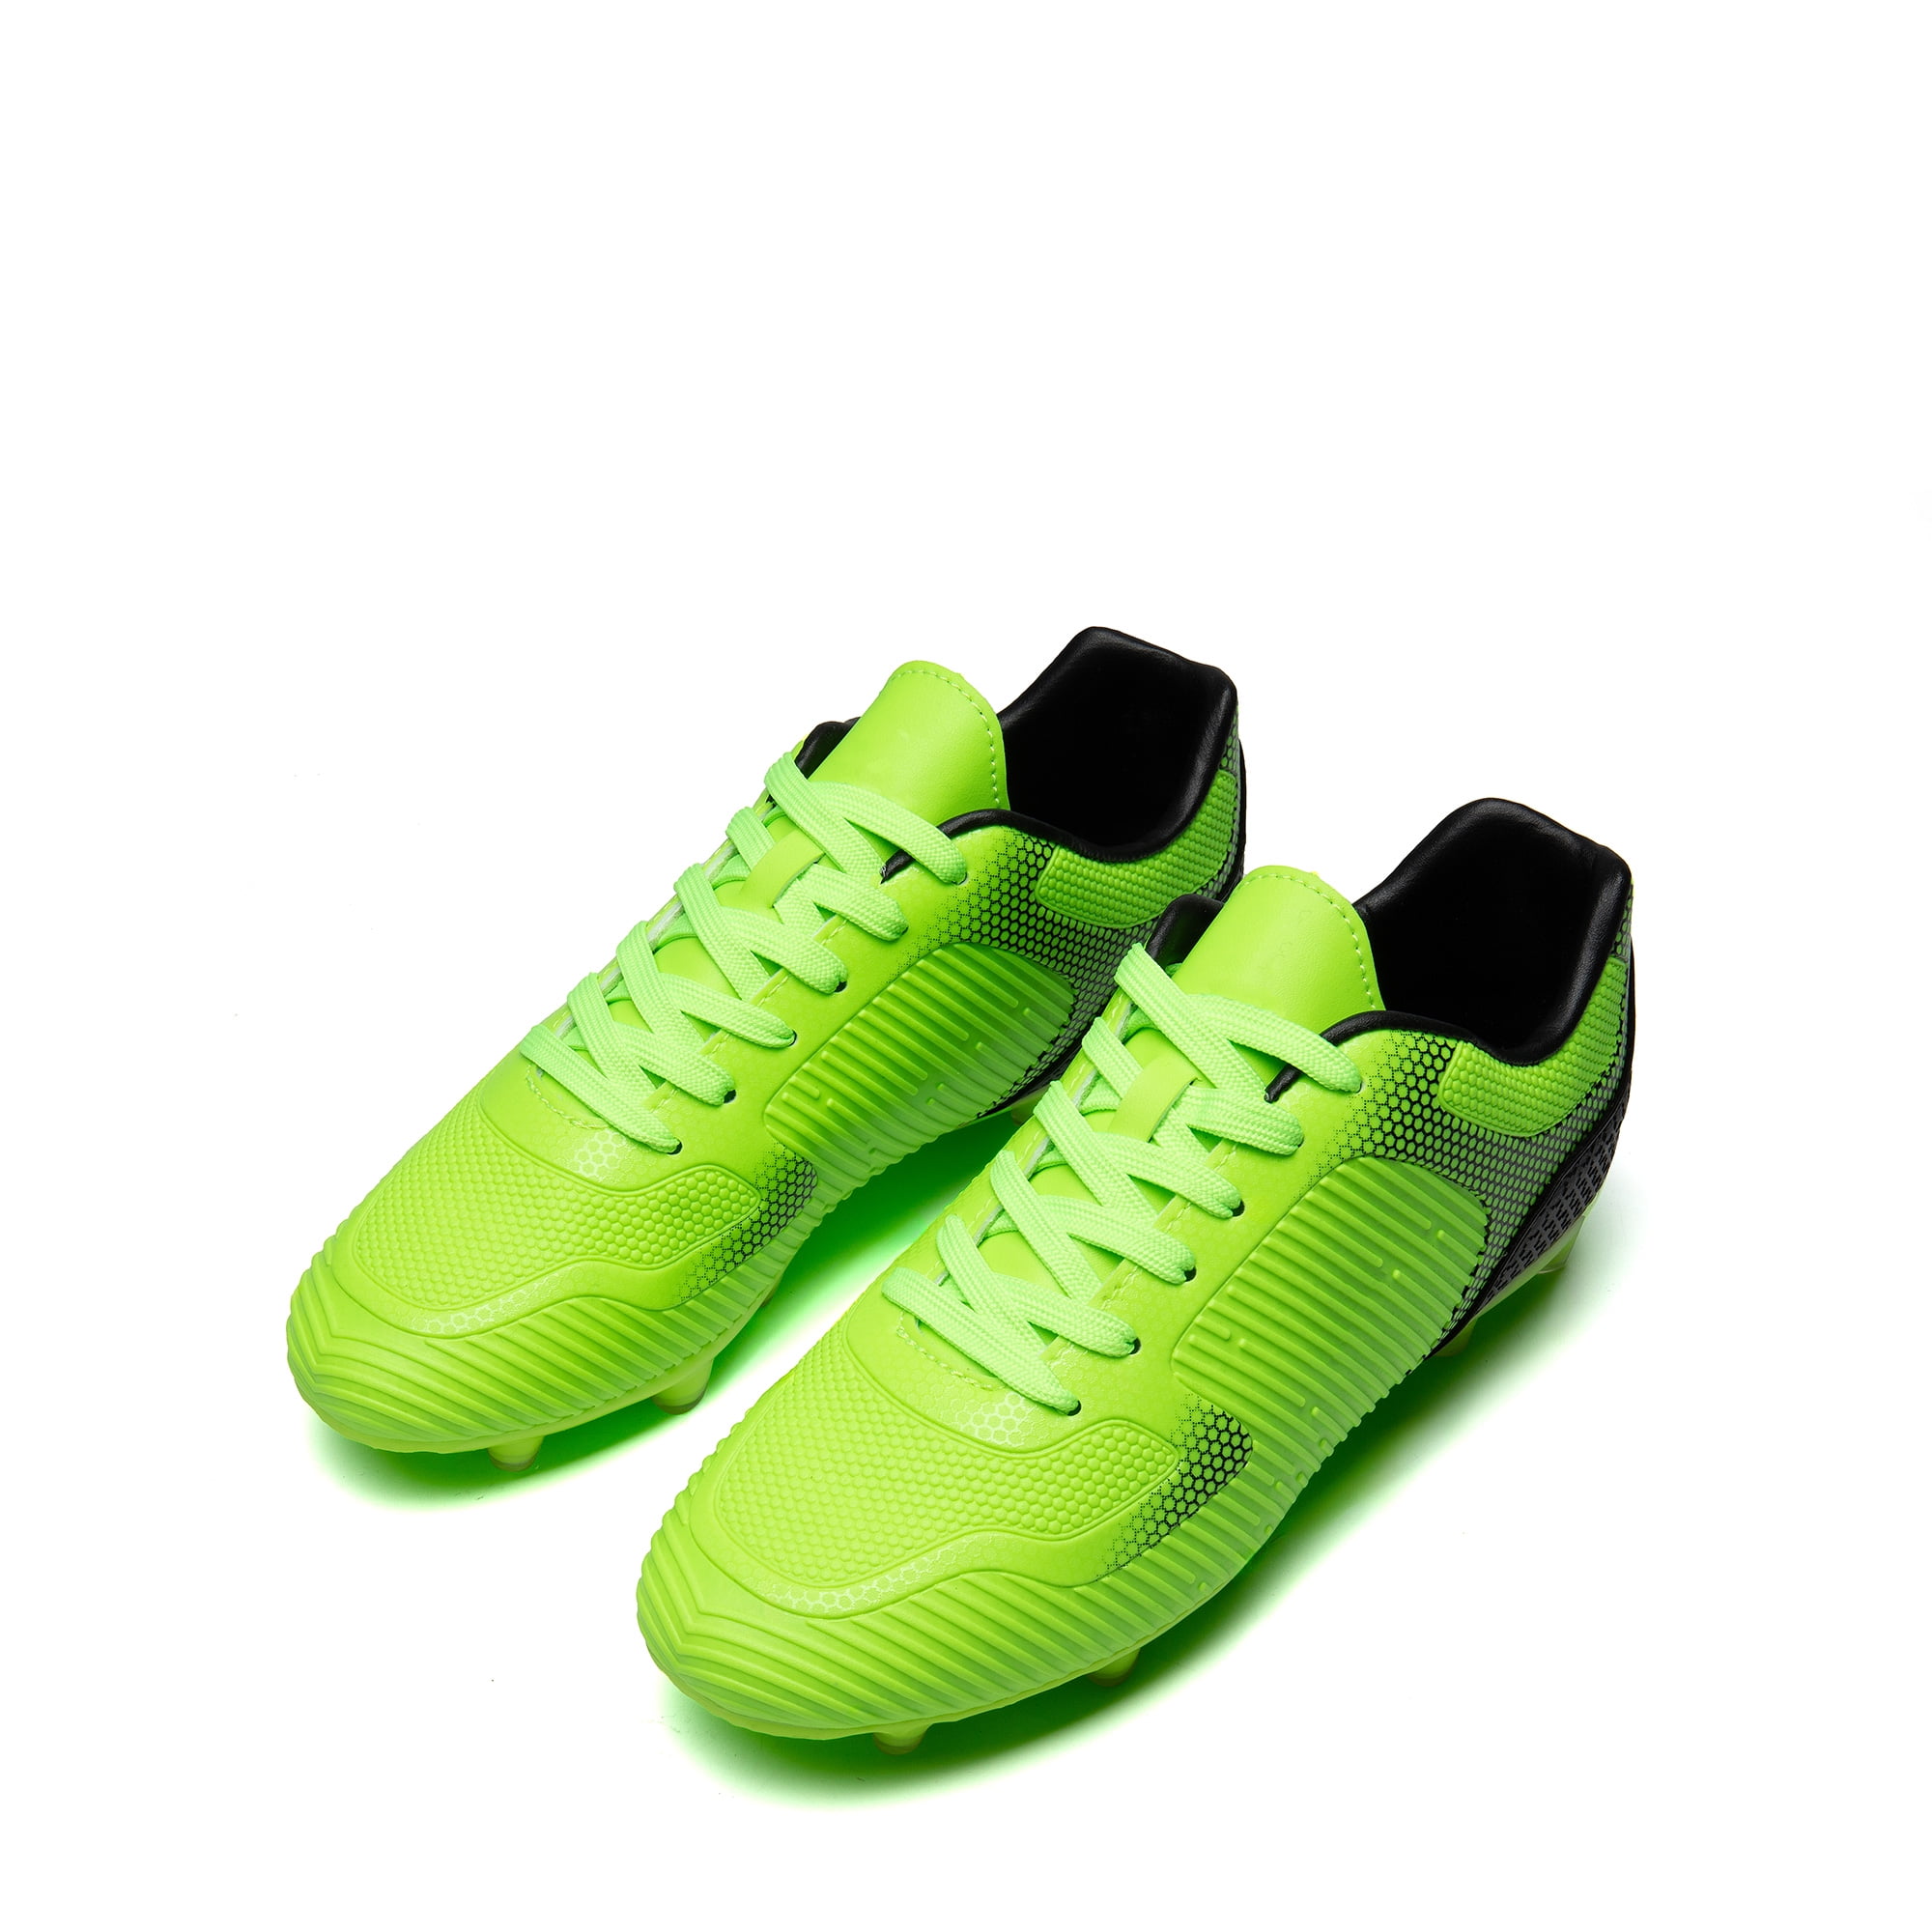 Mens Soccer Cleats Outdoor Athletic Shoes Firm Ground Soccer Cleats ...